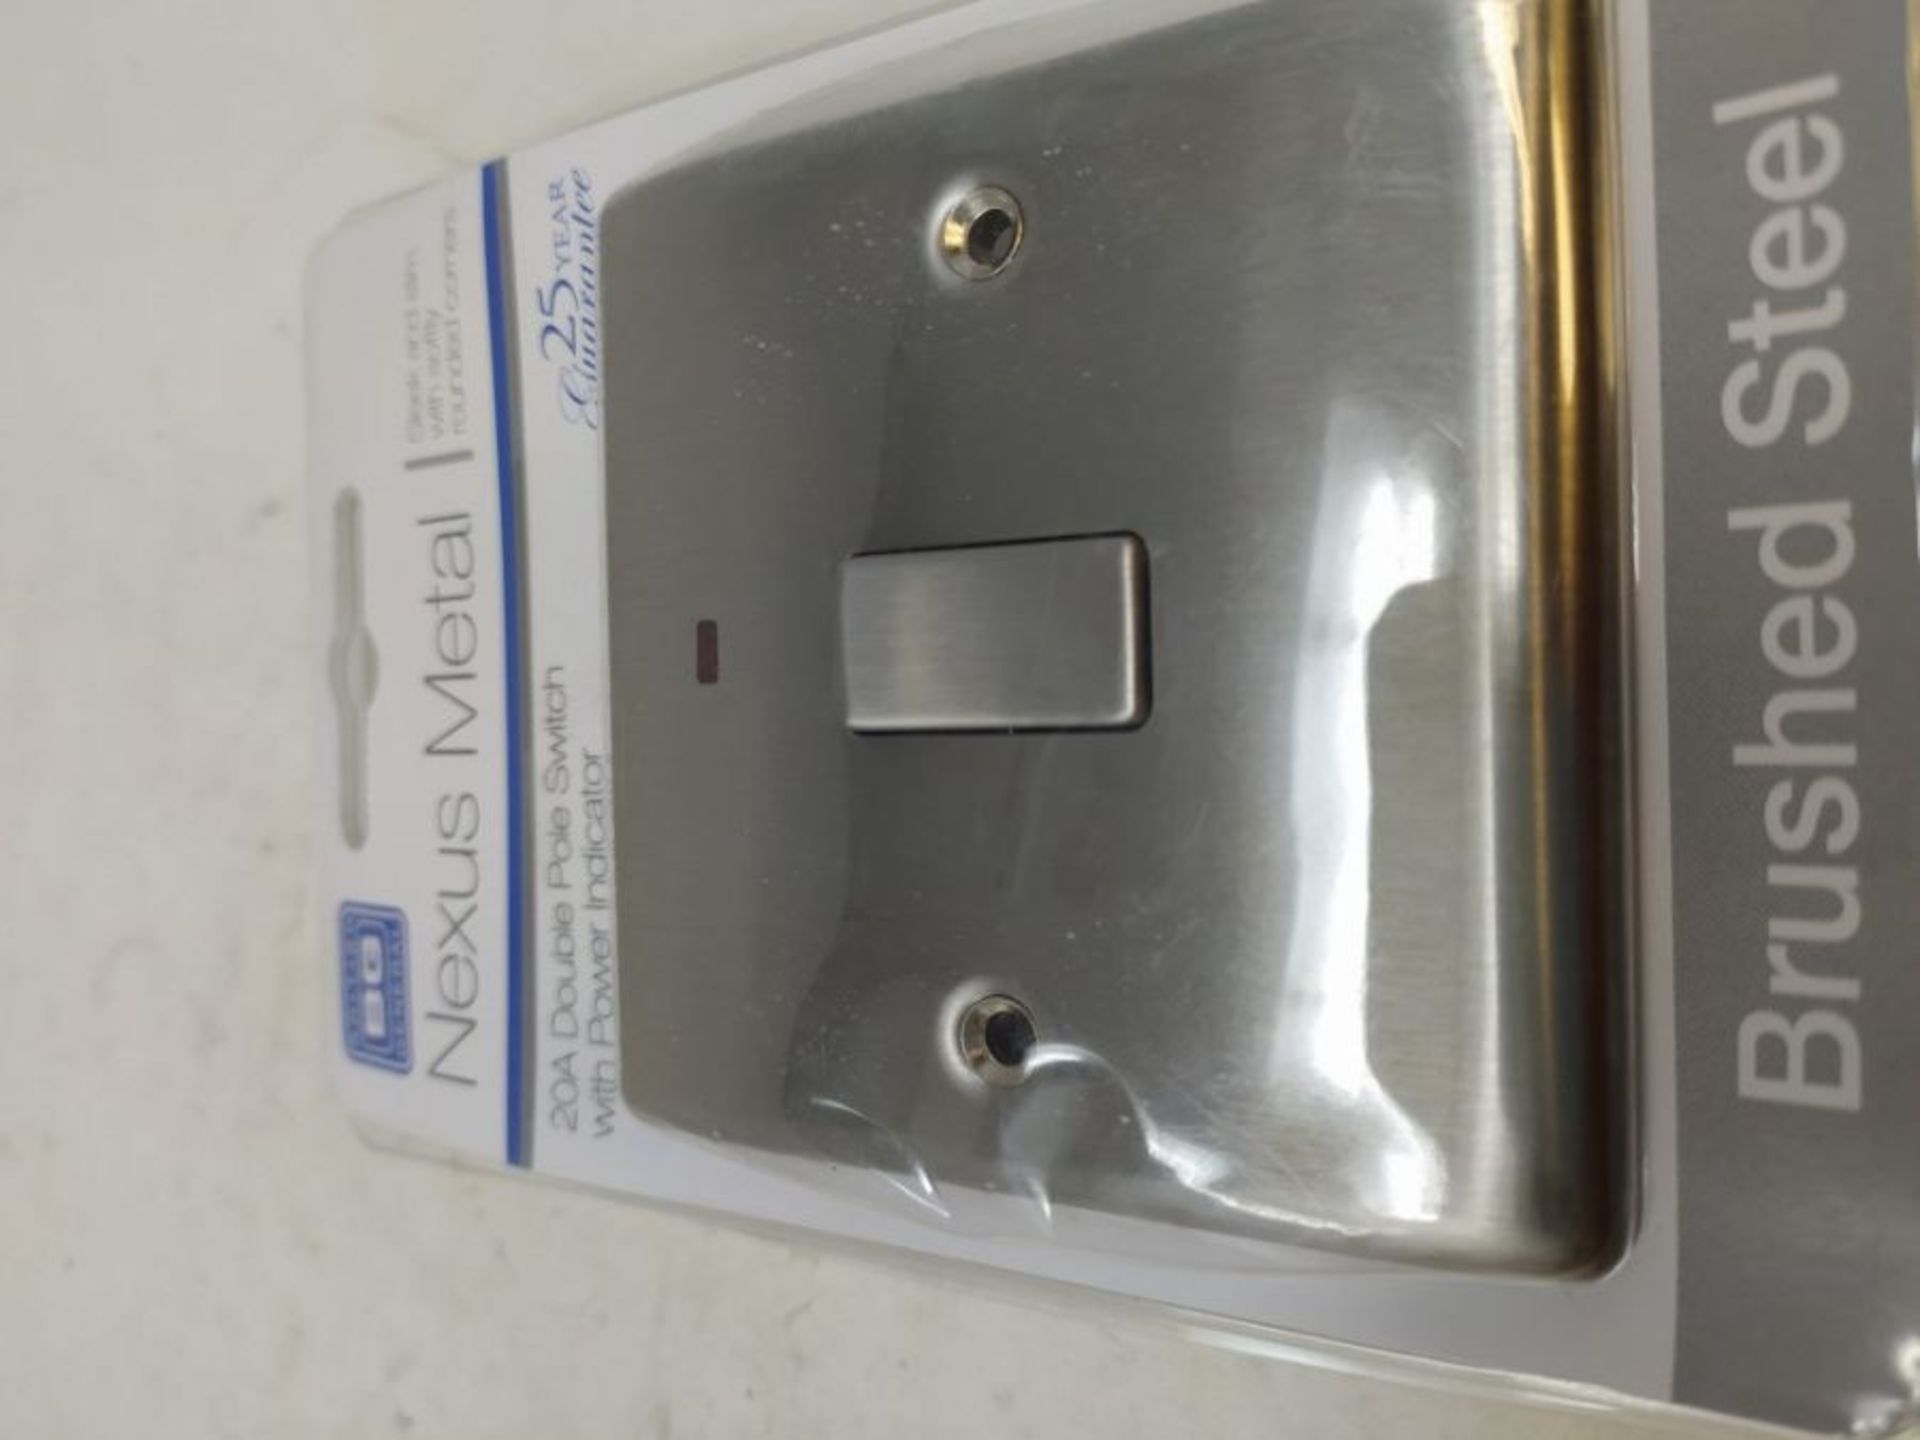 BG Electrical Single Light Switch with Power Indicator, Brushed Steel, 2-Way, 10AX - Image 2 of 2